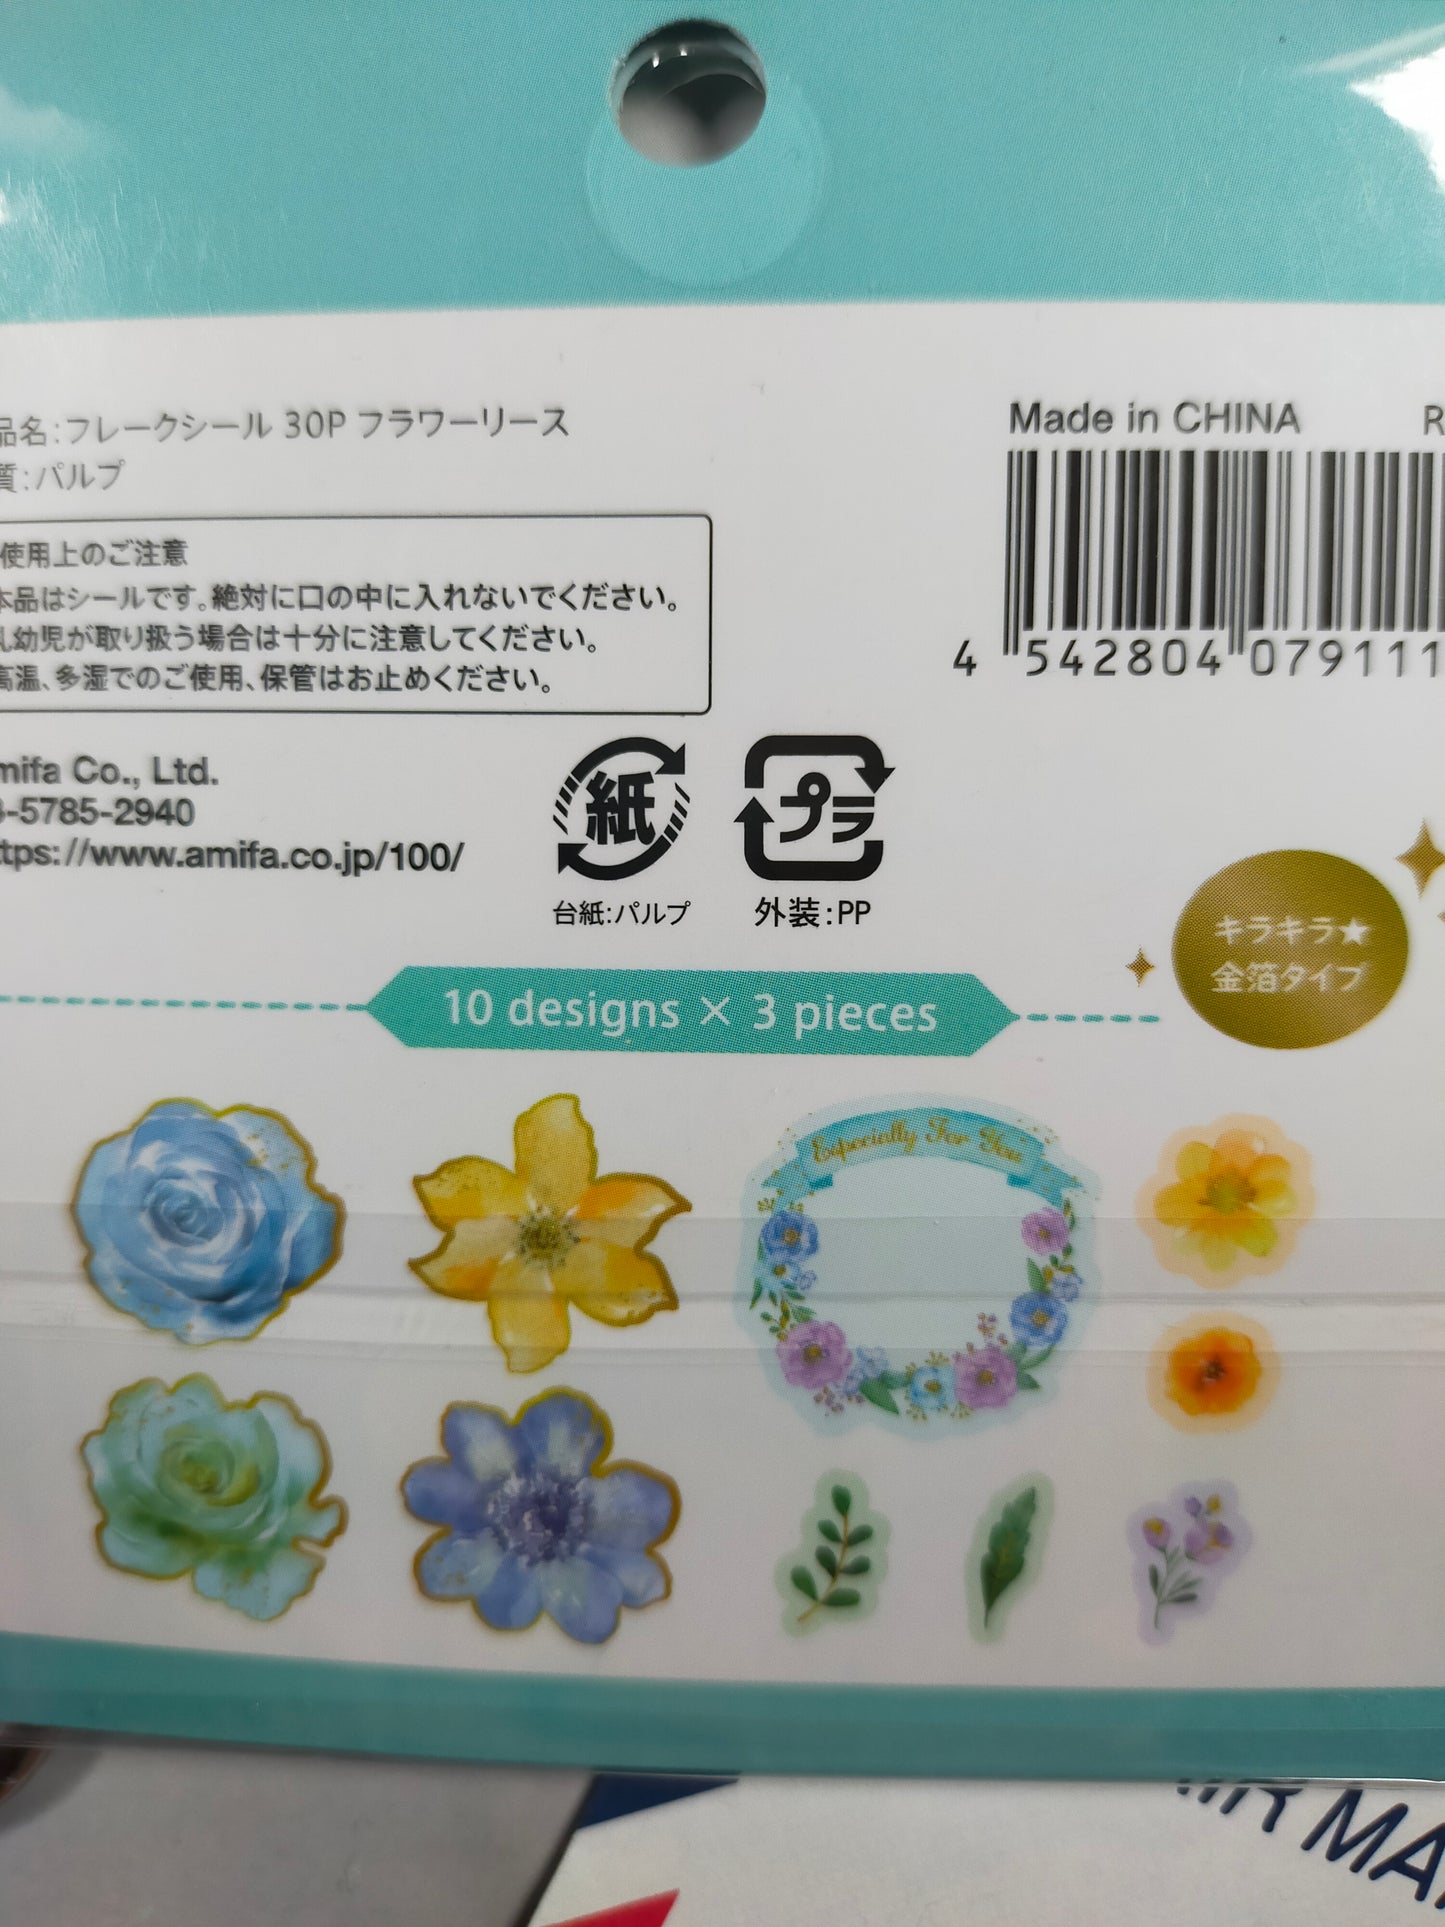 STICKER FLAKES Flower Wreath Foil Stamping 10designs*4pieces, amifa_ Pink / Light Blue